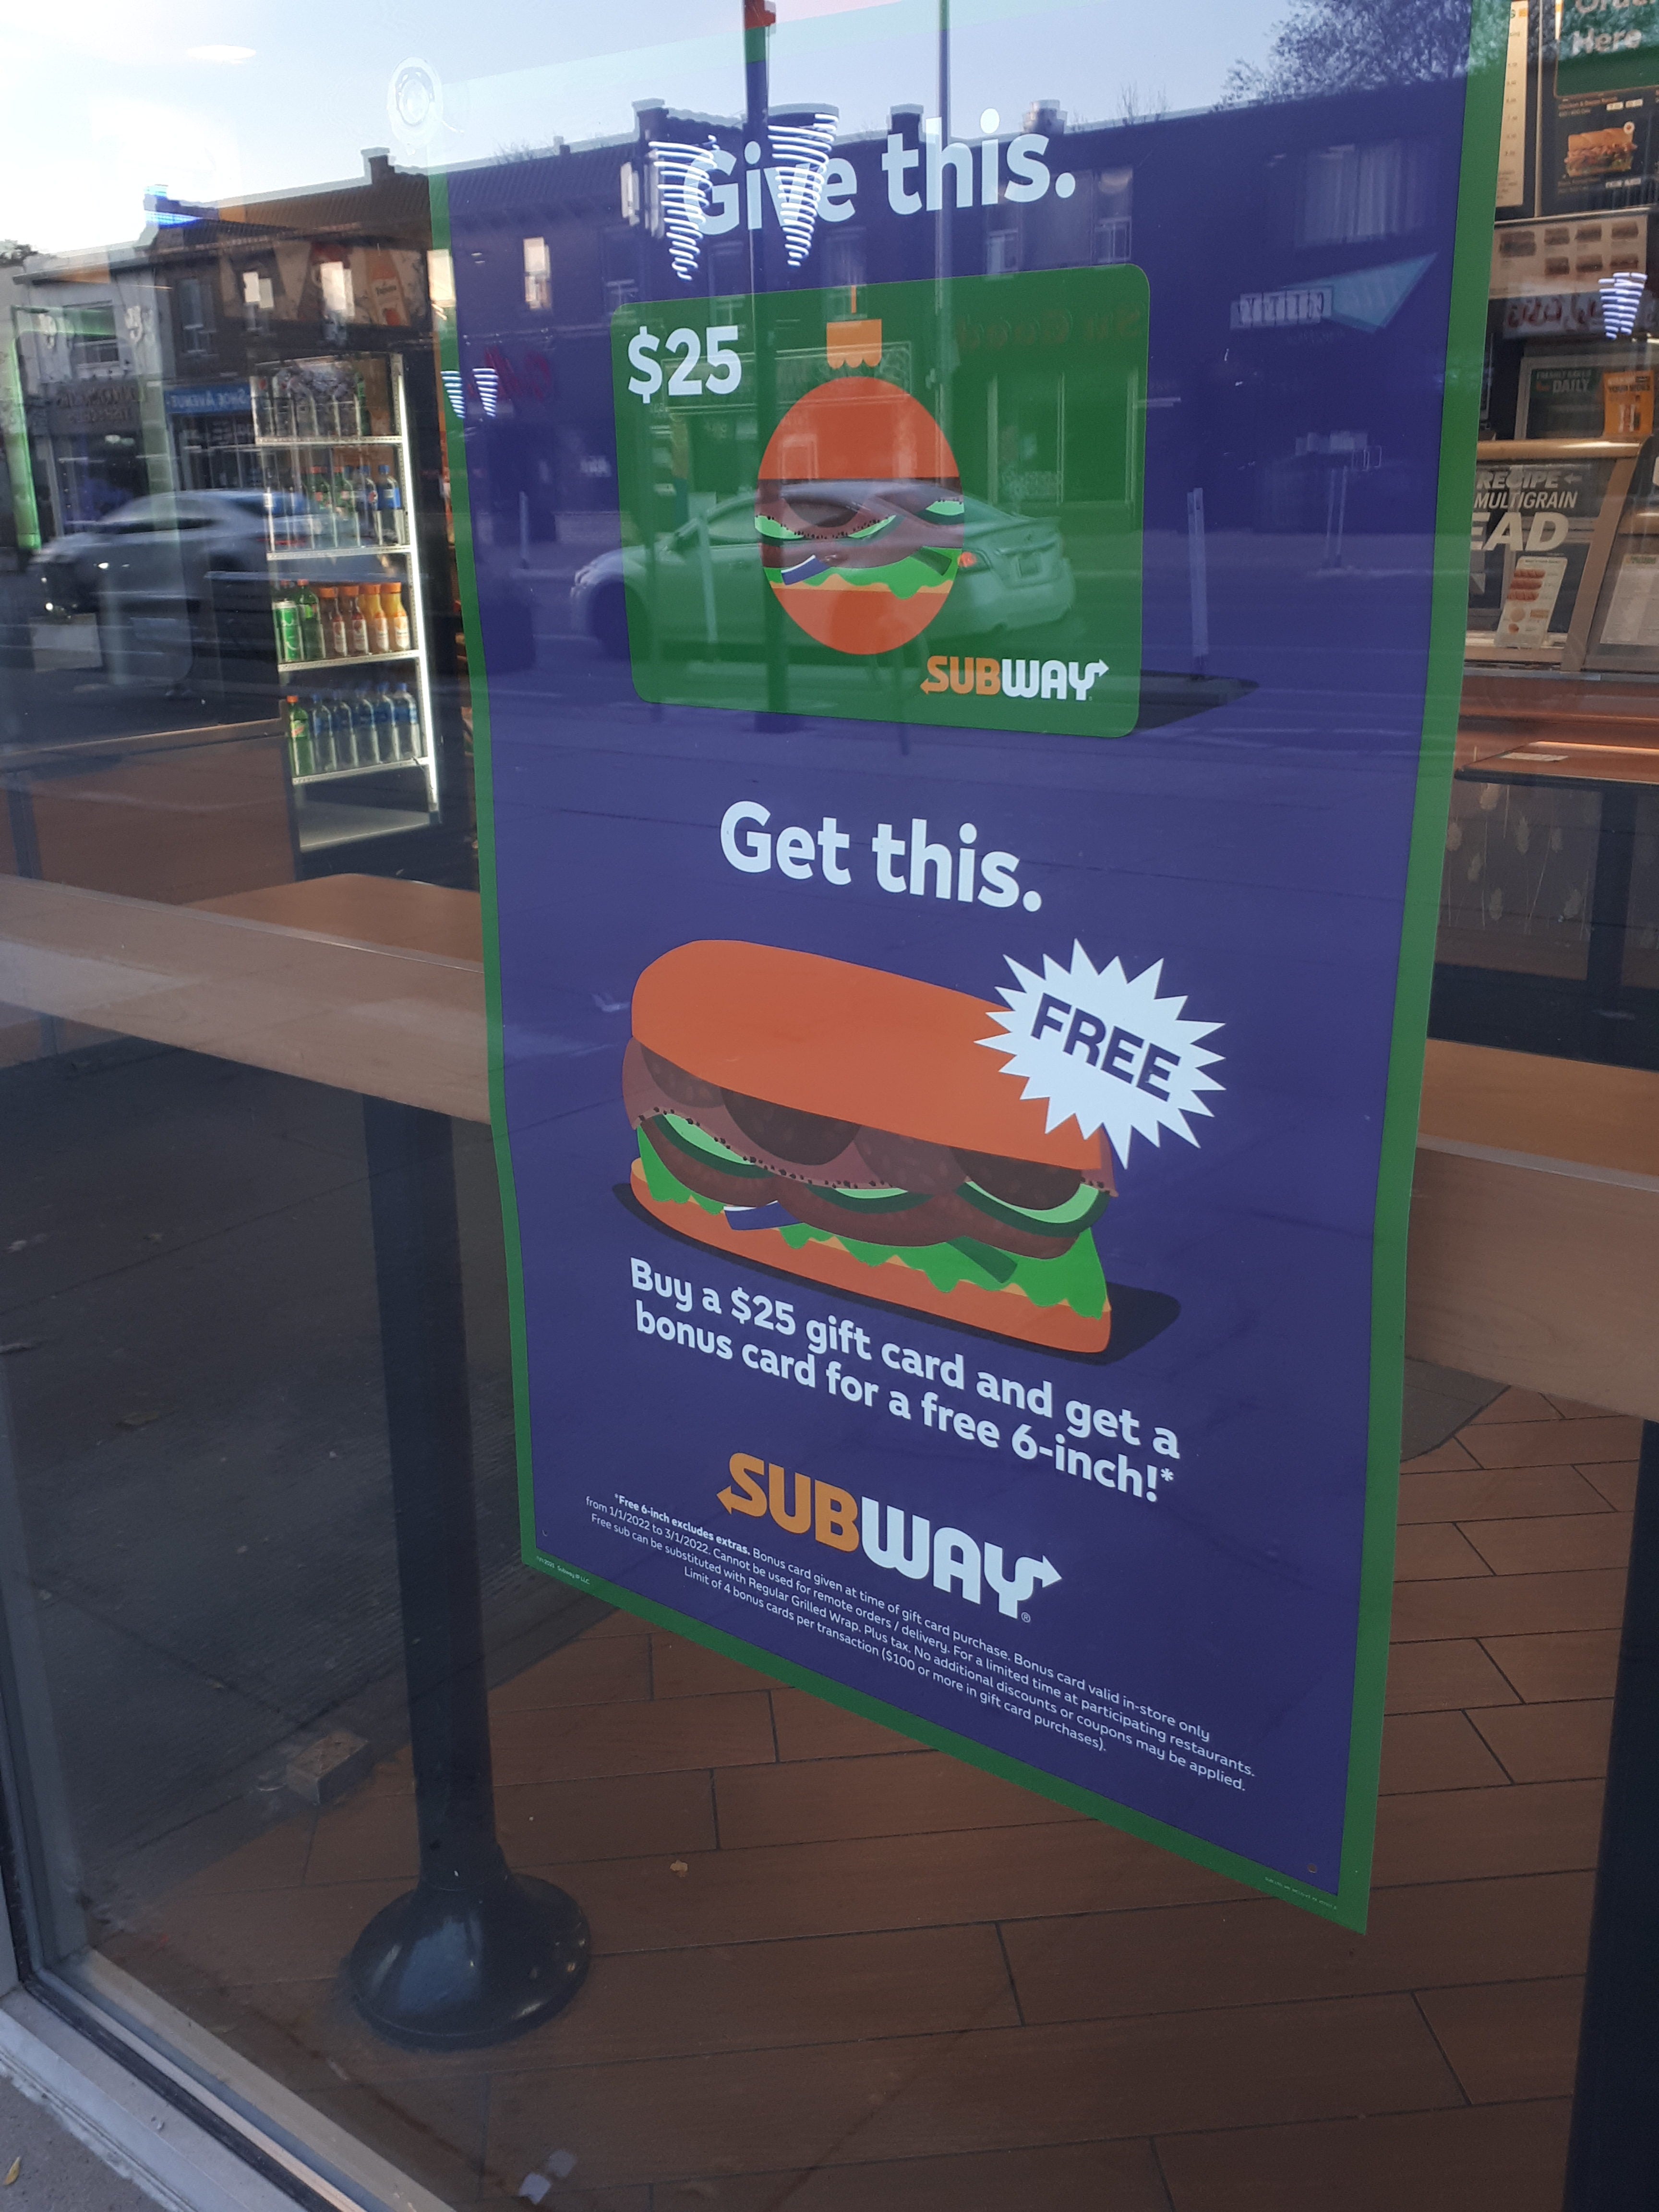 Subway Canada Coupons: Buy One Get One FREE + Buy Any Footlong with Drink  and Get One Footlong for $0.99 + More Coupons - Canadian Freebies, Coupons,  Deals, Bargains, Flyers, Contests Canada